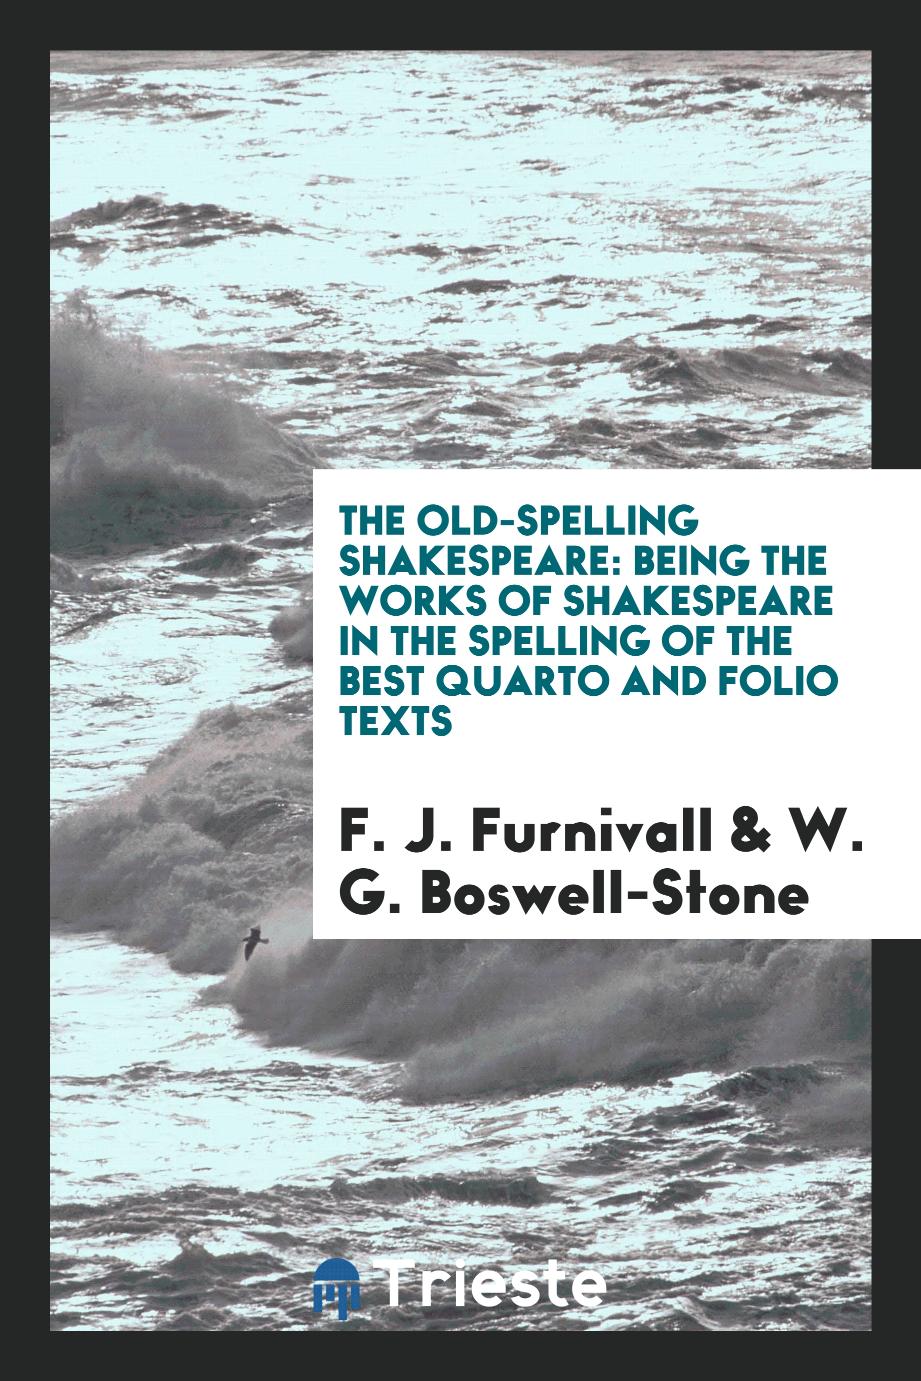 The old-spelling Shakespeare: being the works of Shakespeare in the spelling of the best quarto and folio texts